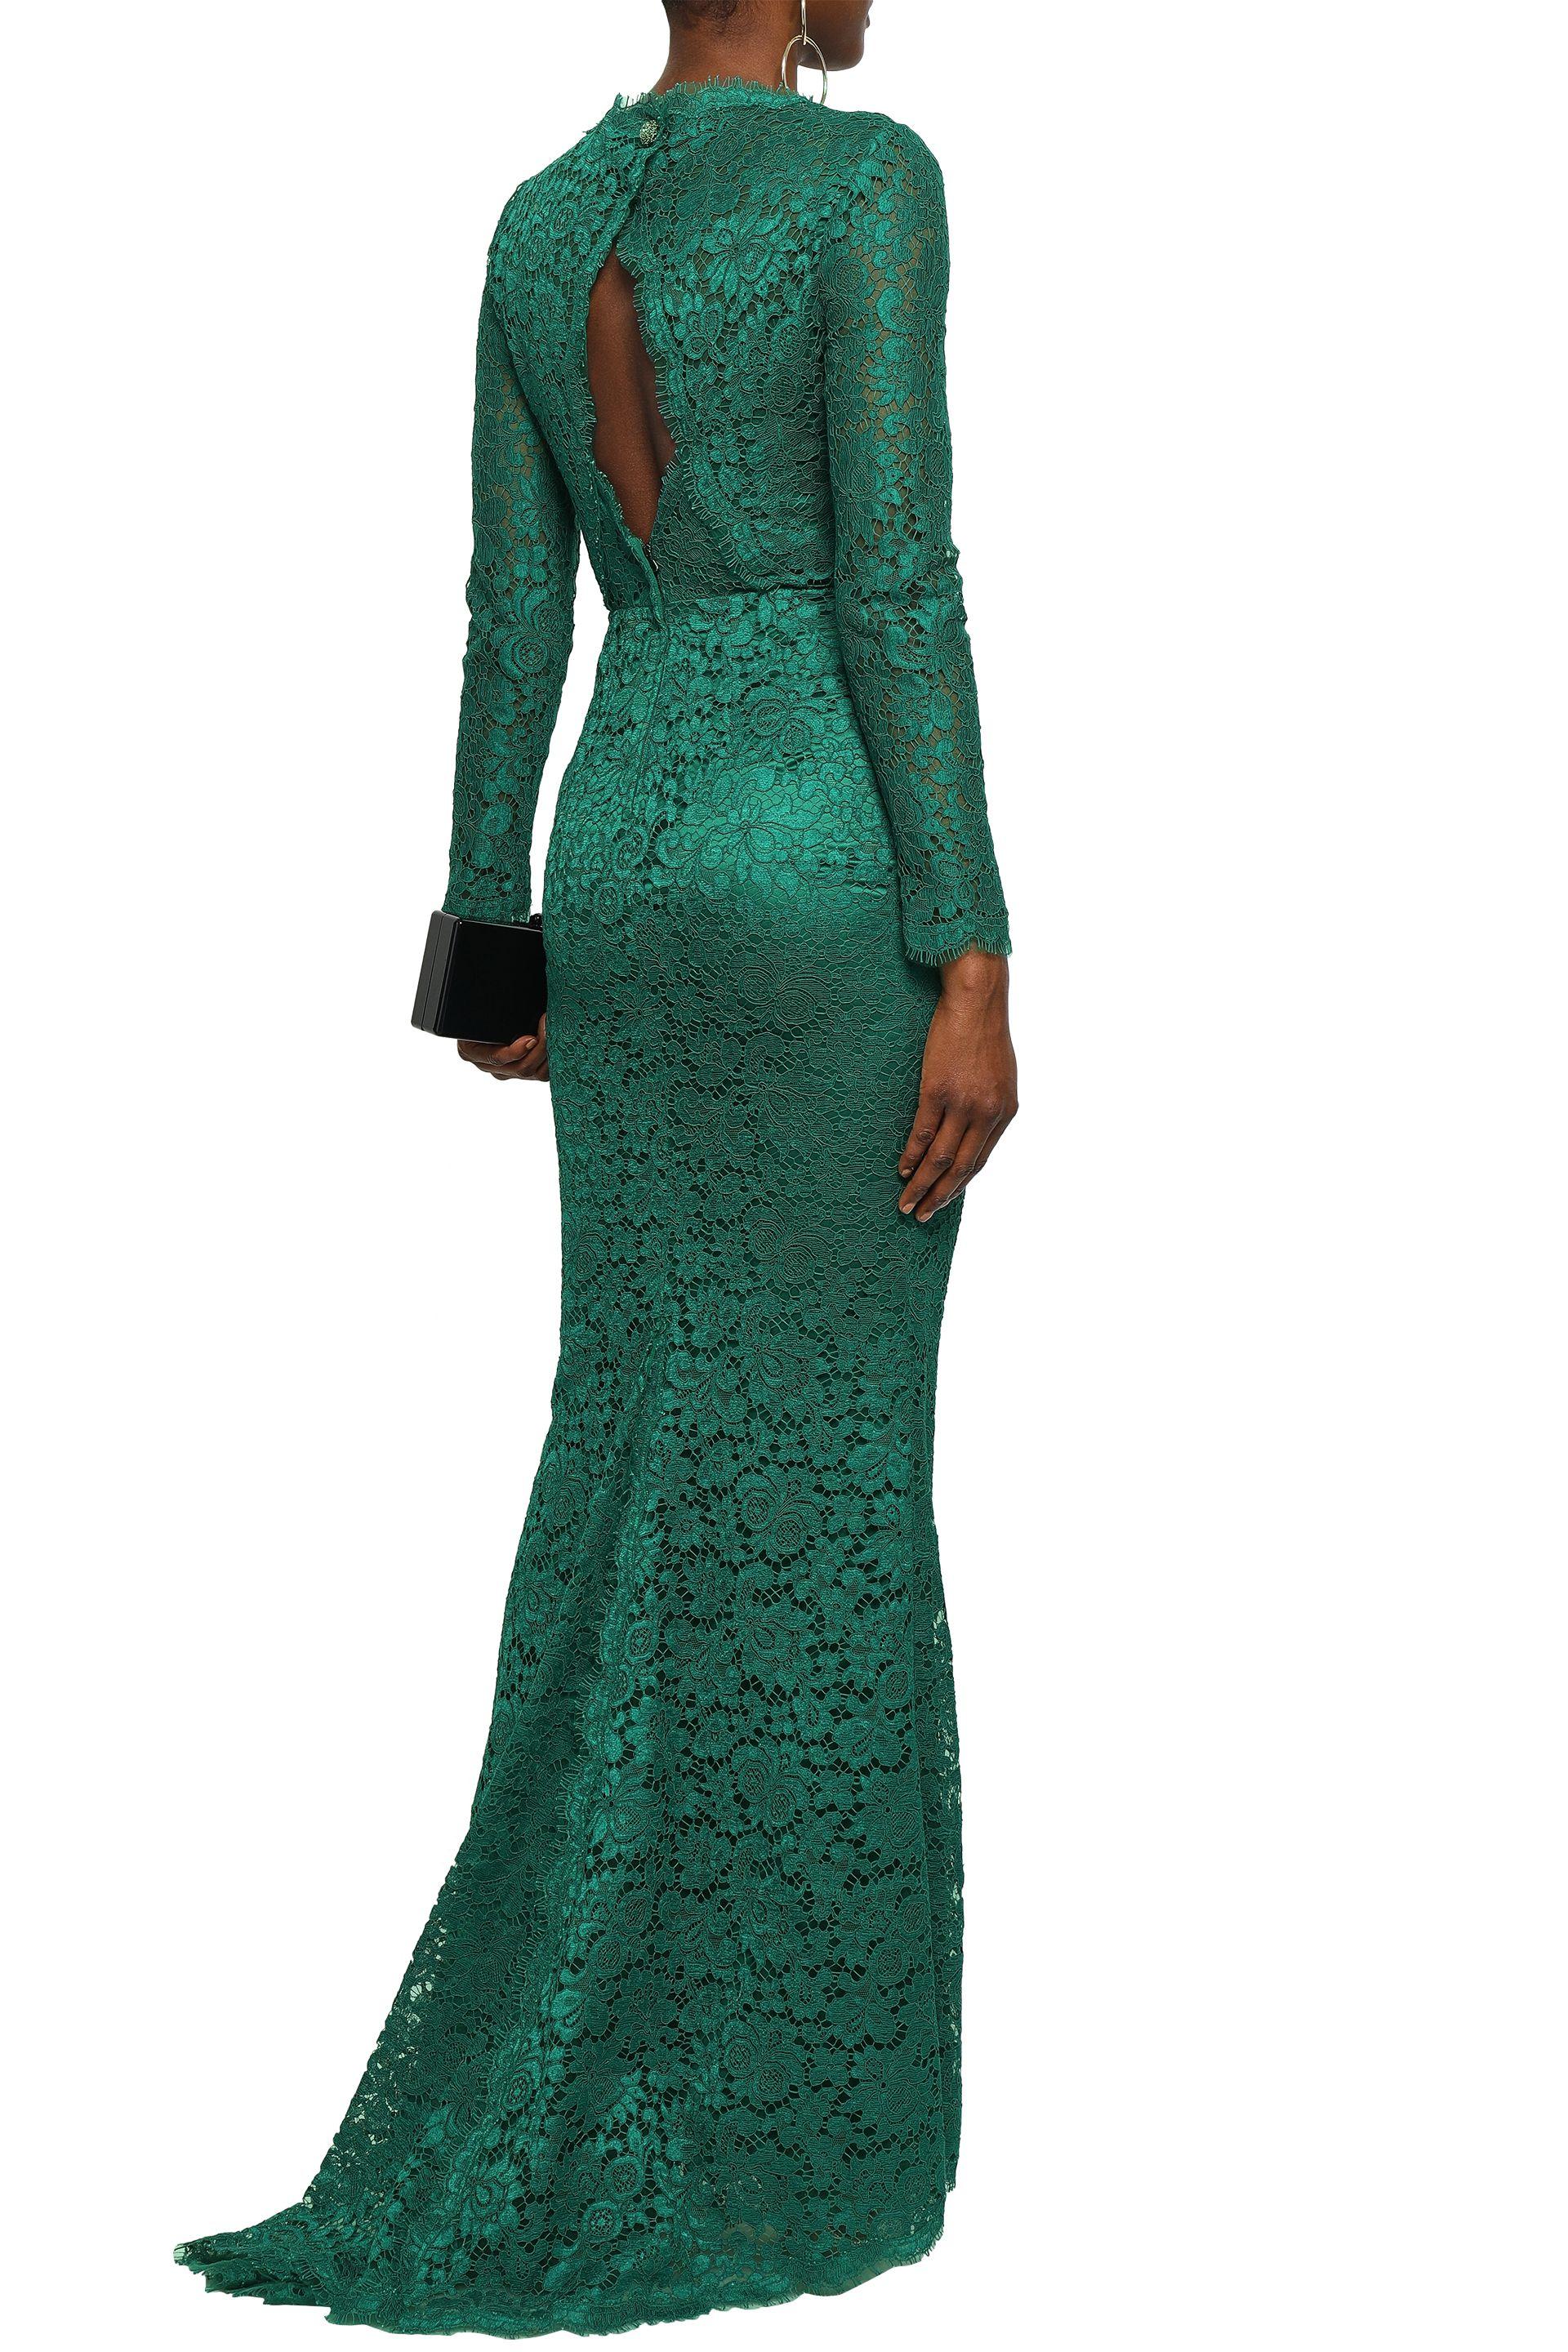 Dolce & Gabbana Cutout Corded Lace Gown Emerald in Green - Lyst